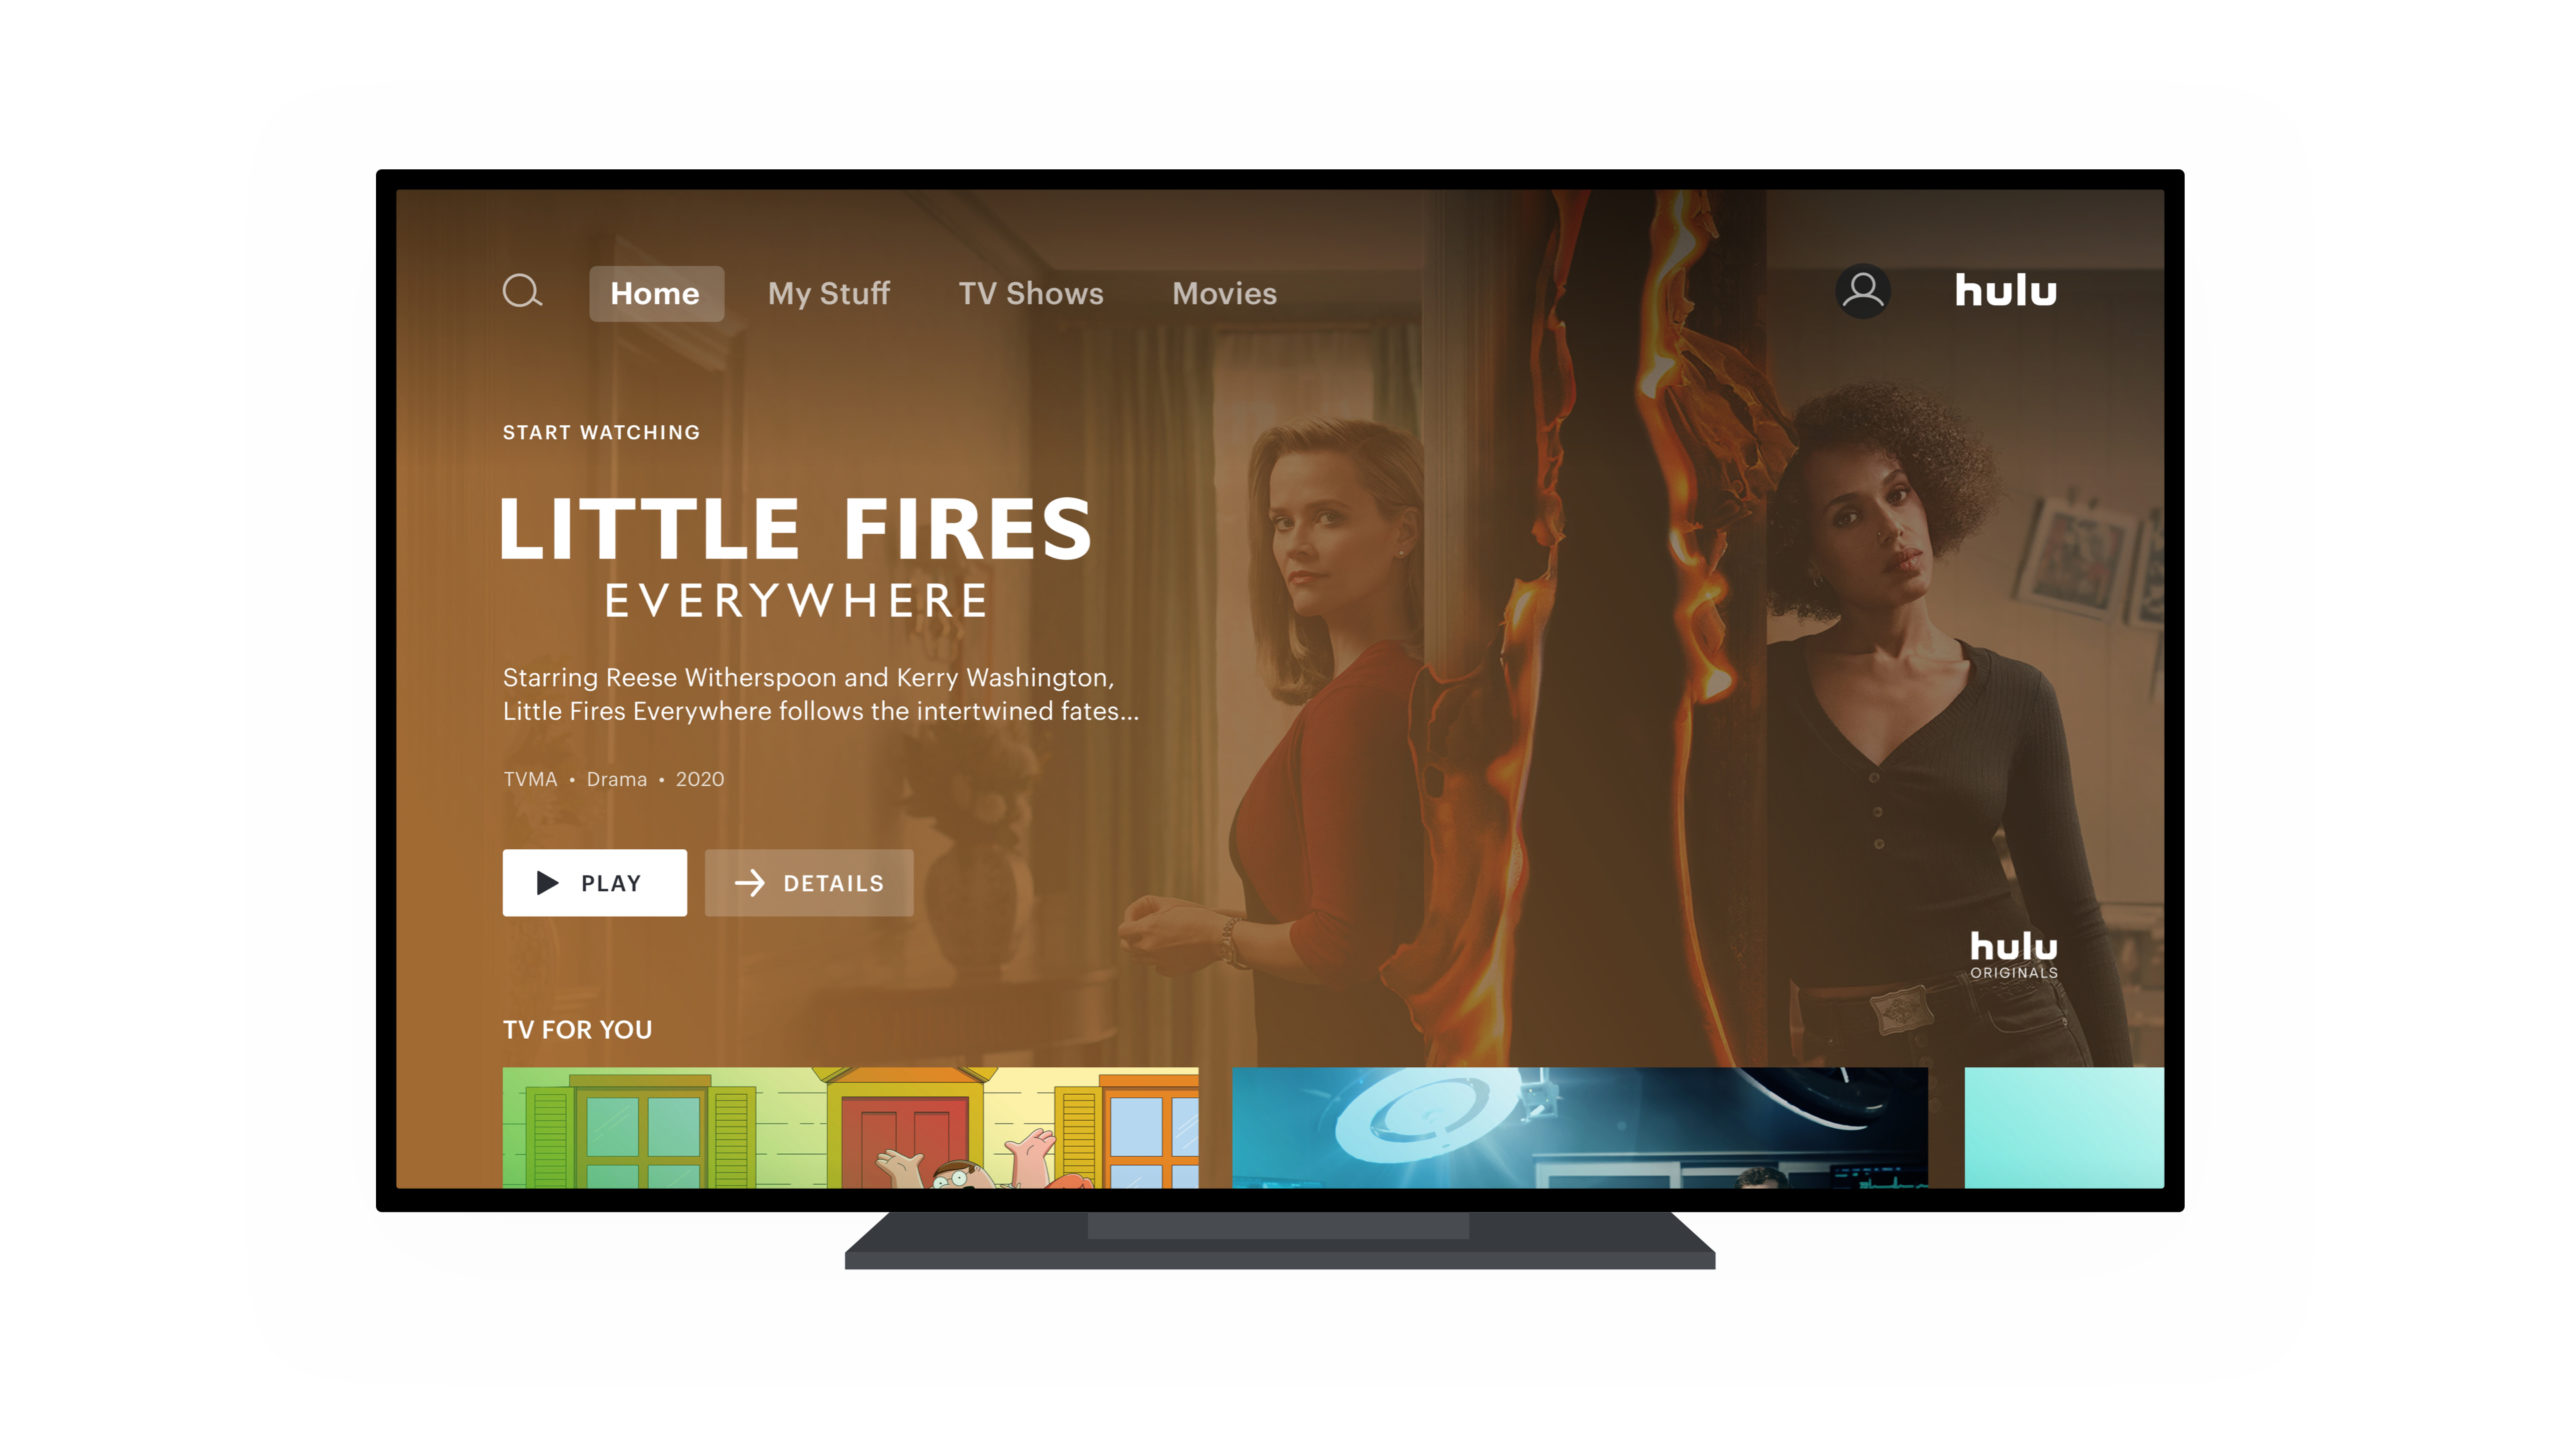 How free over-the-air TV pairs perfectly with affordable streaming services like Netflix